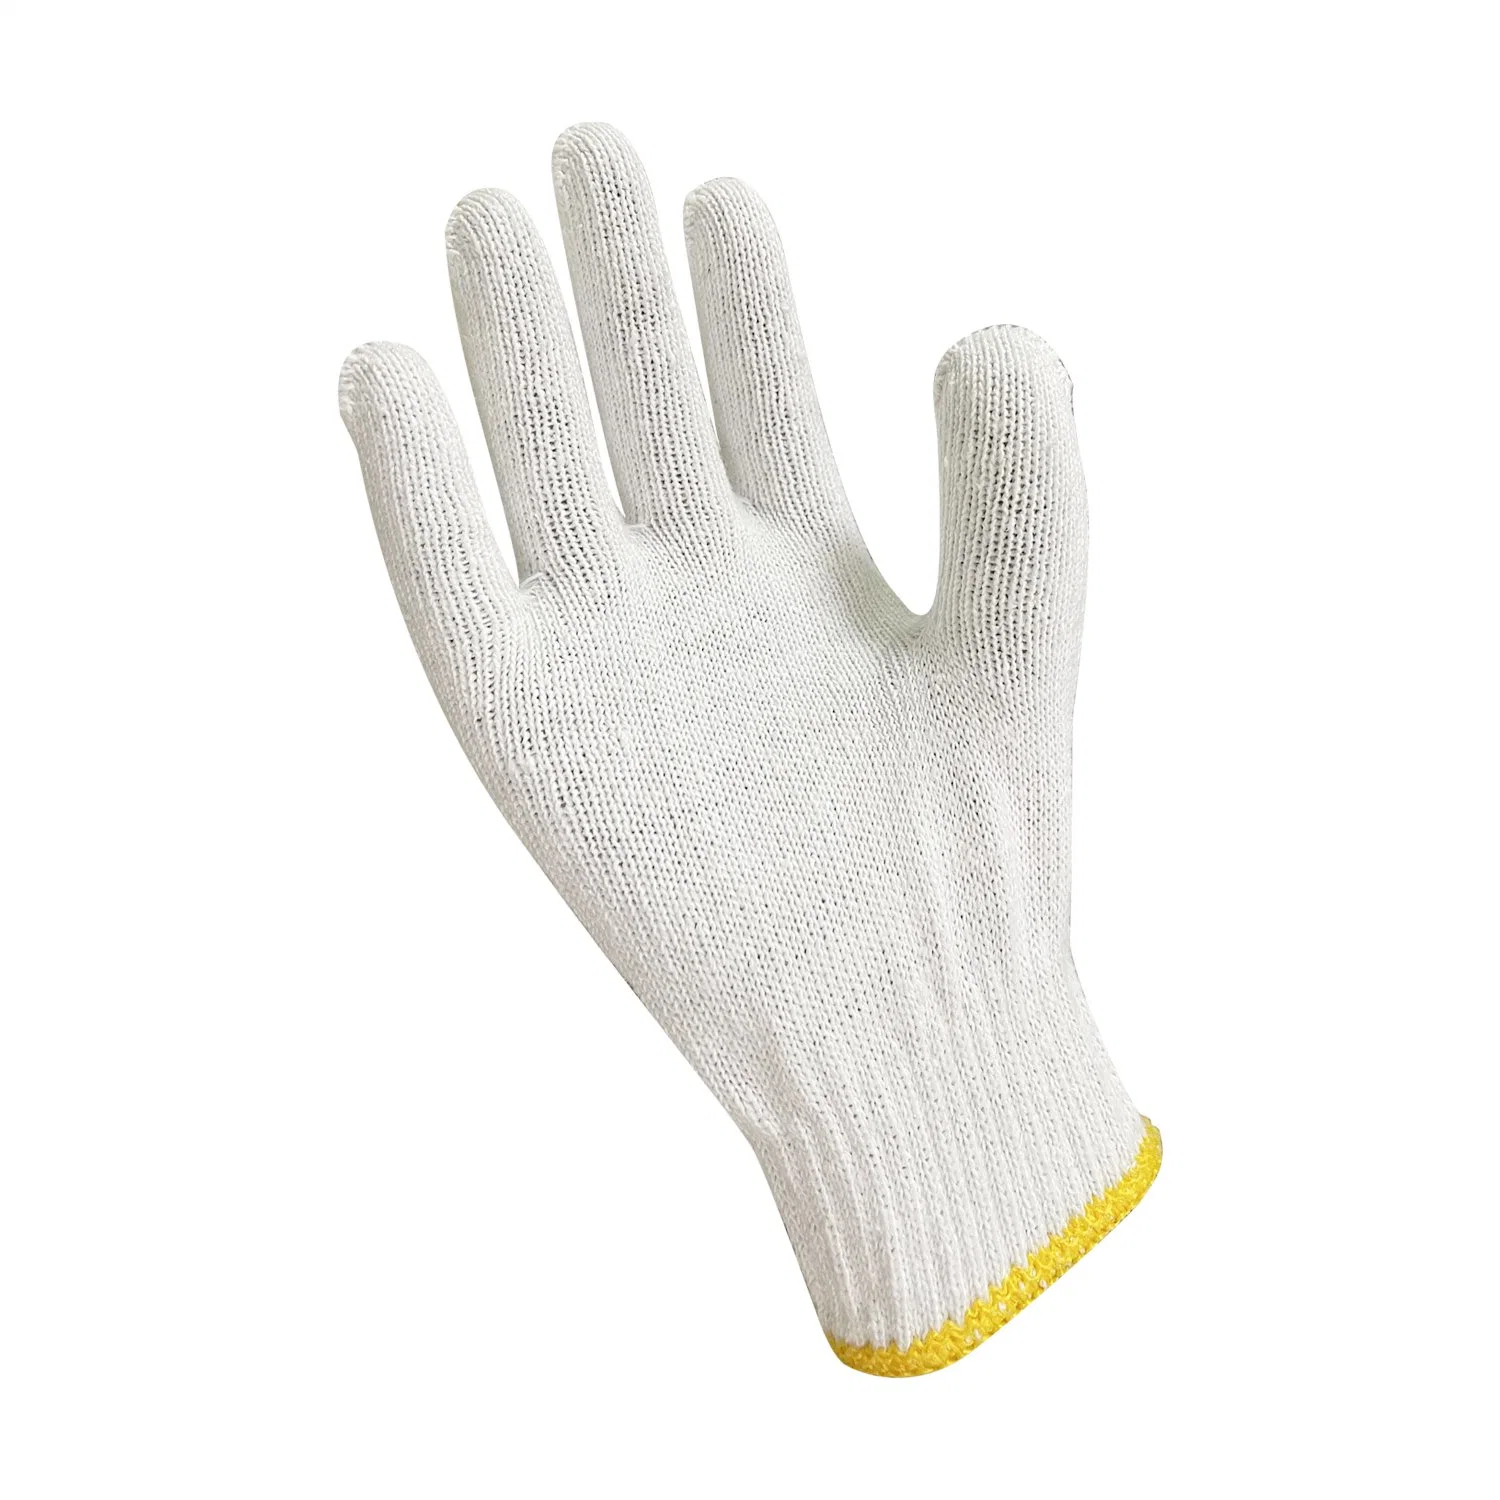 Good Price 7/10 Gauges Natural White Work Cotton Labor Protection Glove